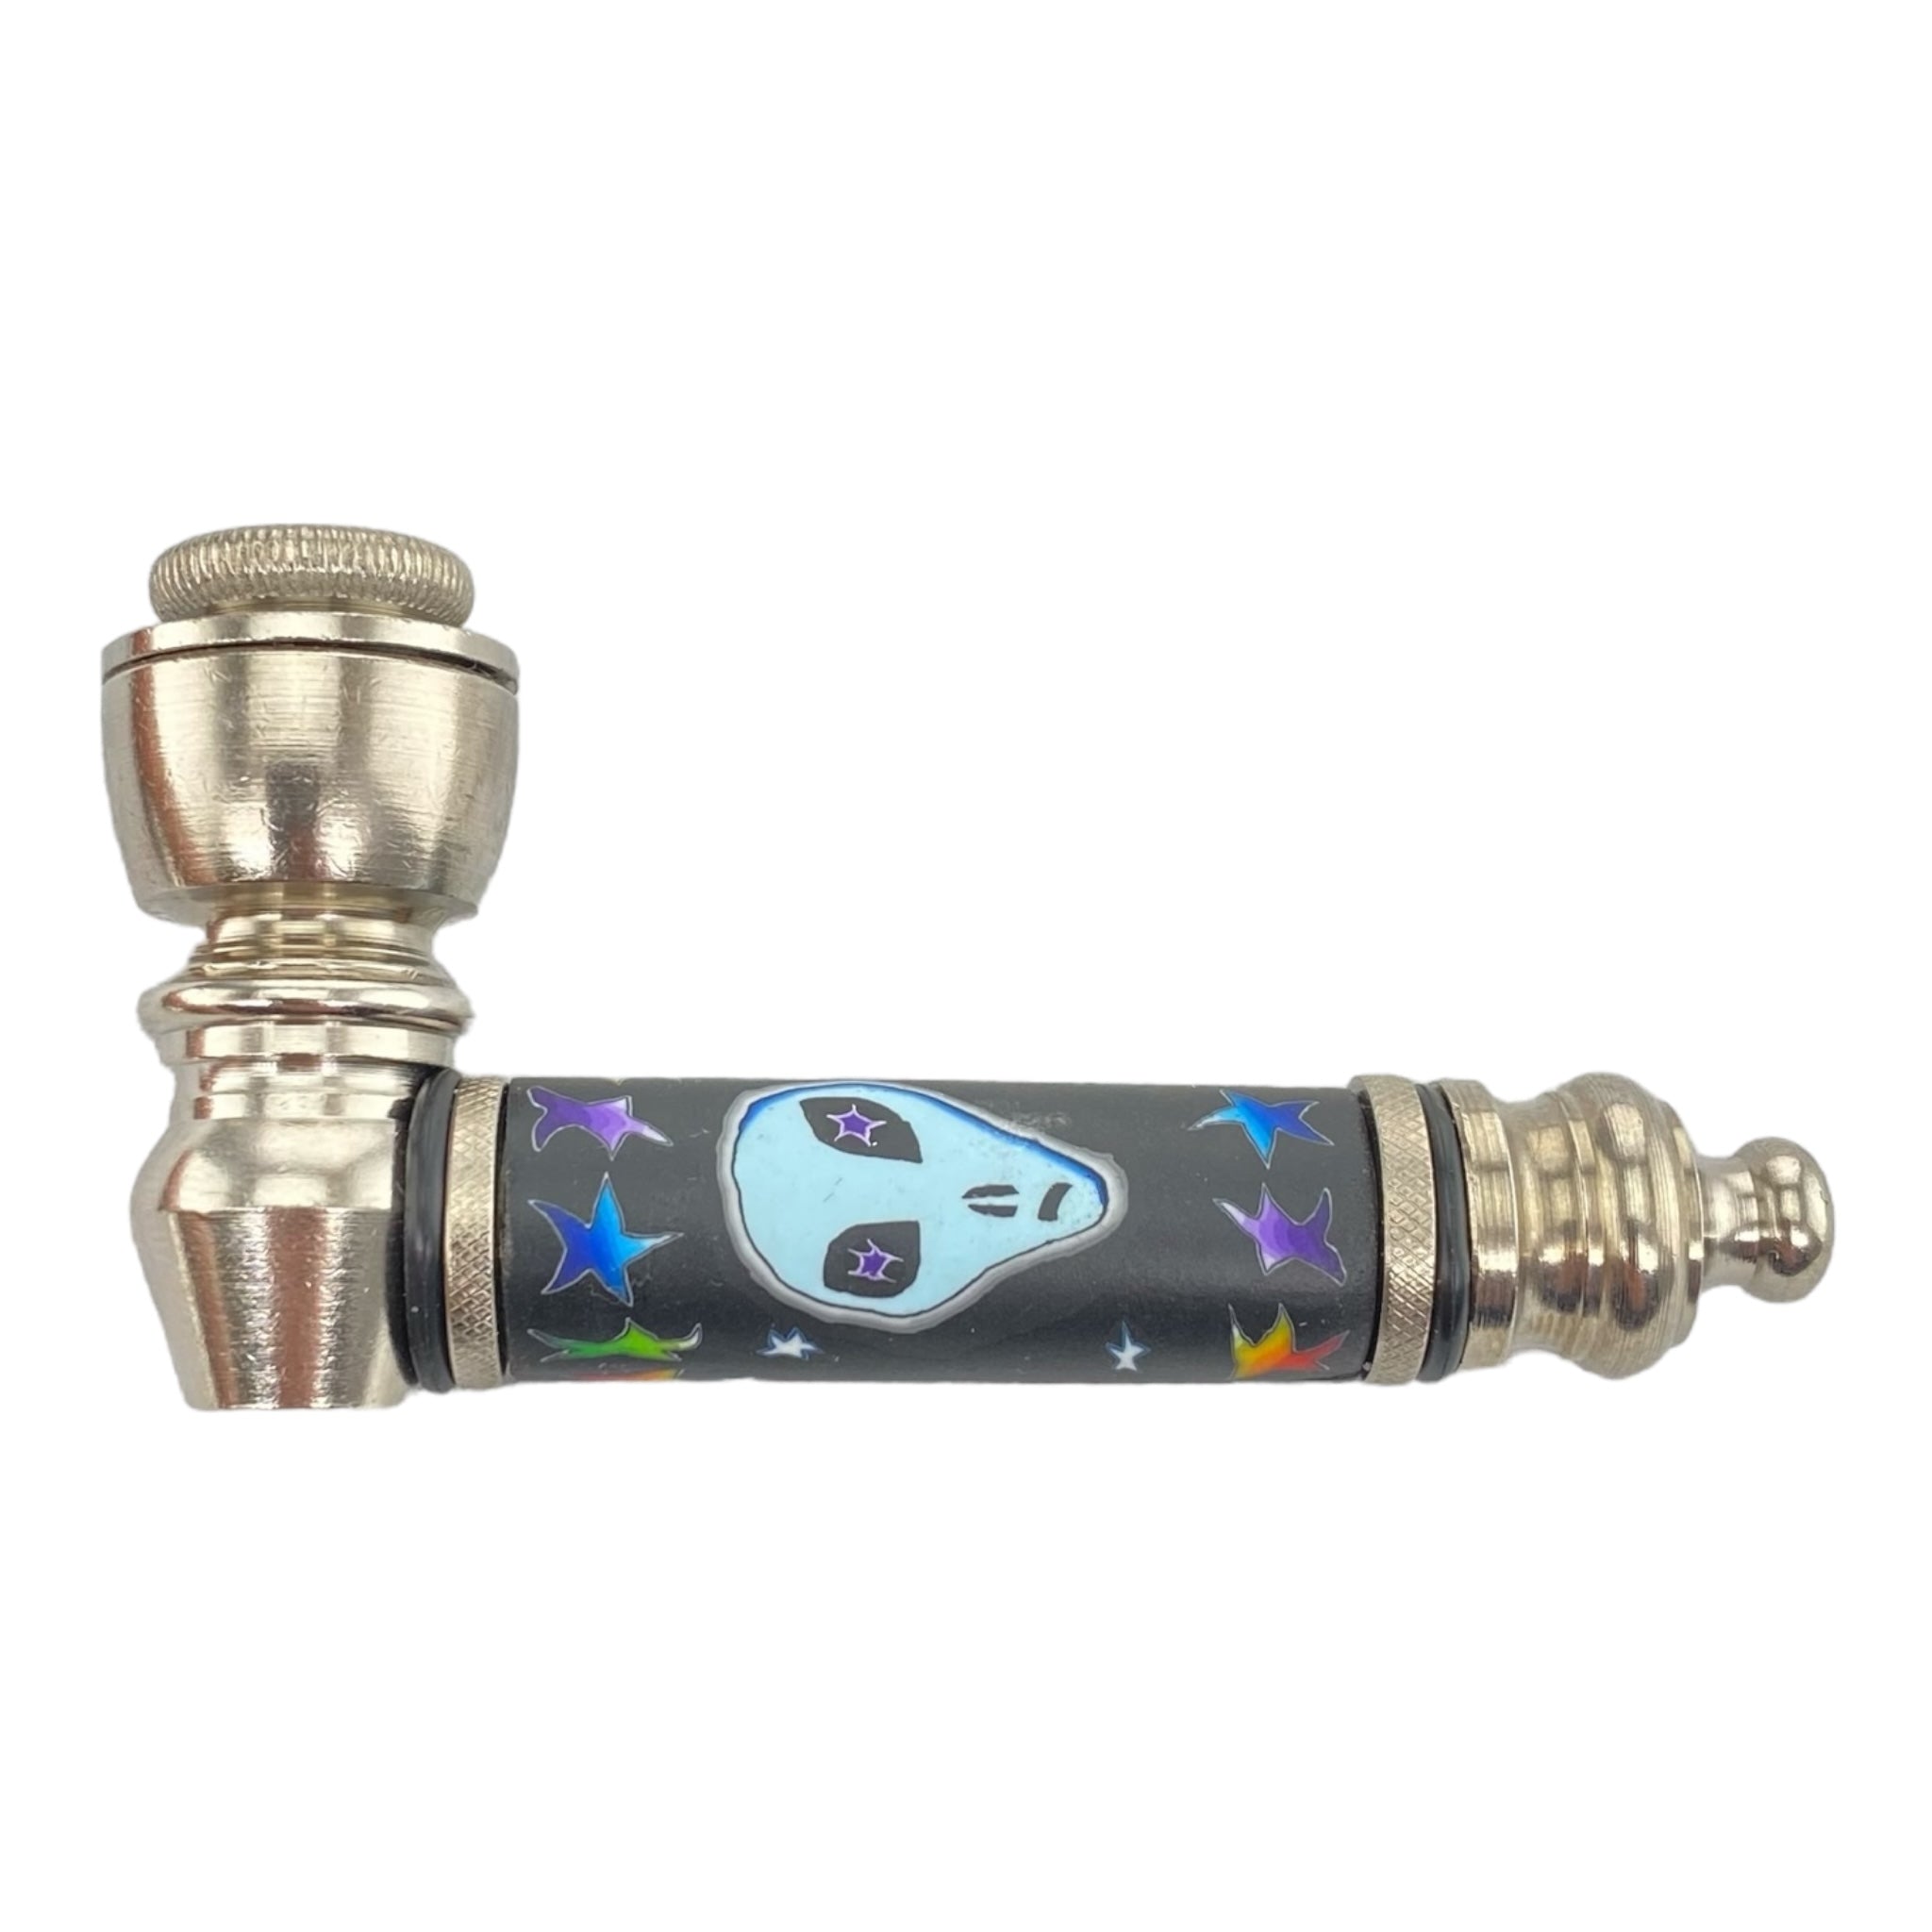 Metal Hand Pipes - Silver Chrome Hand Pipe With Blue Glow In The Dark Alien Head